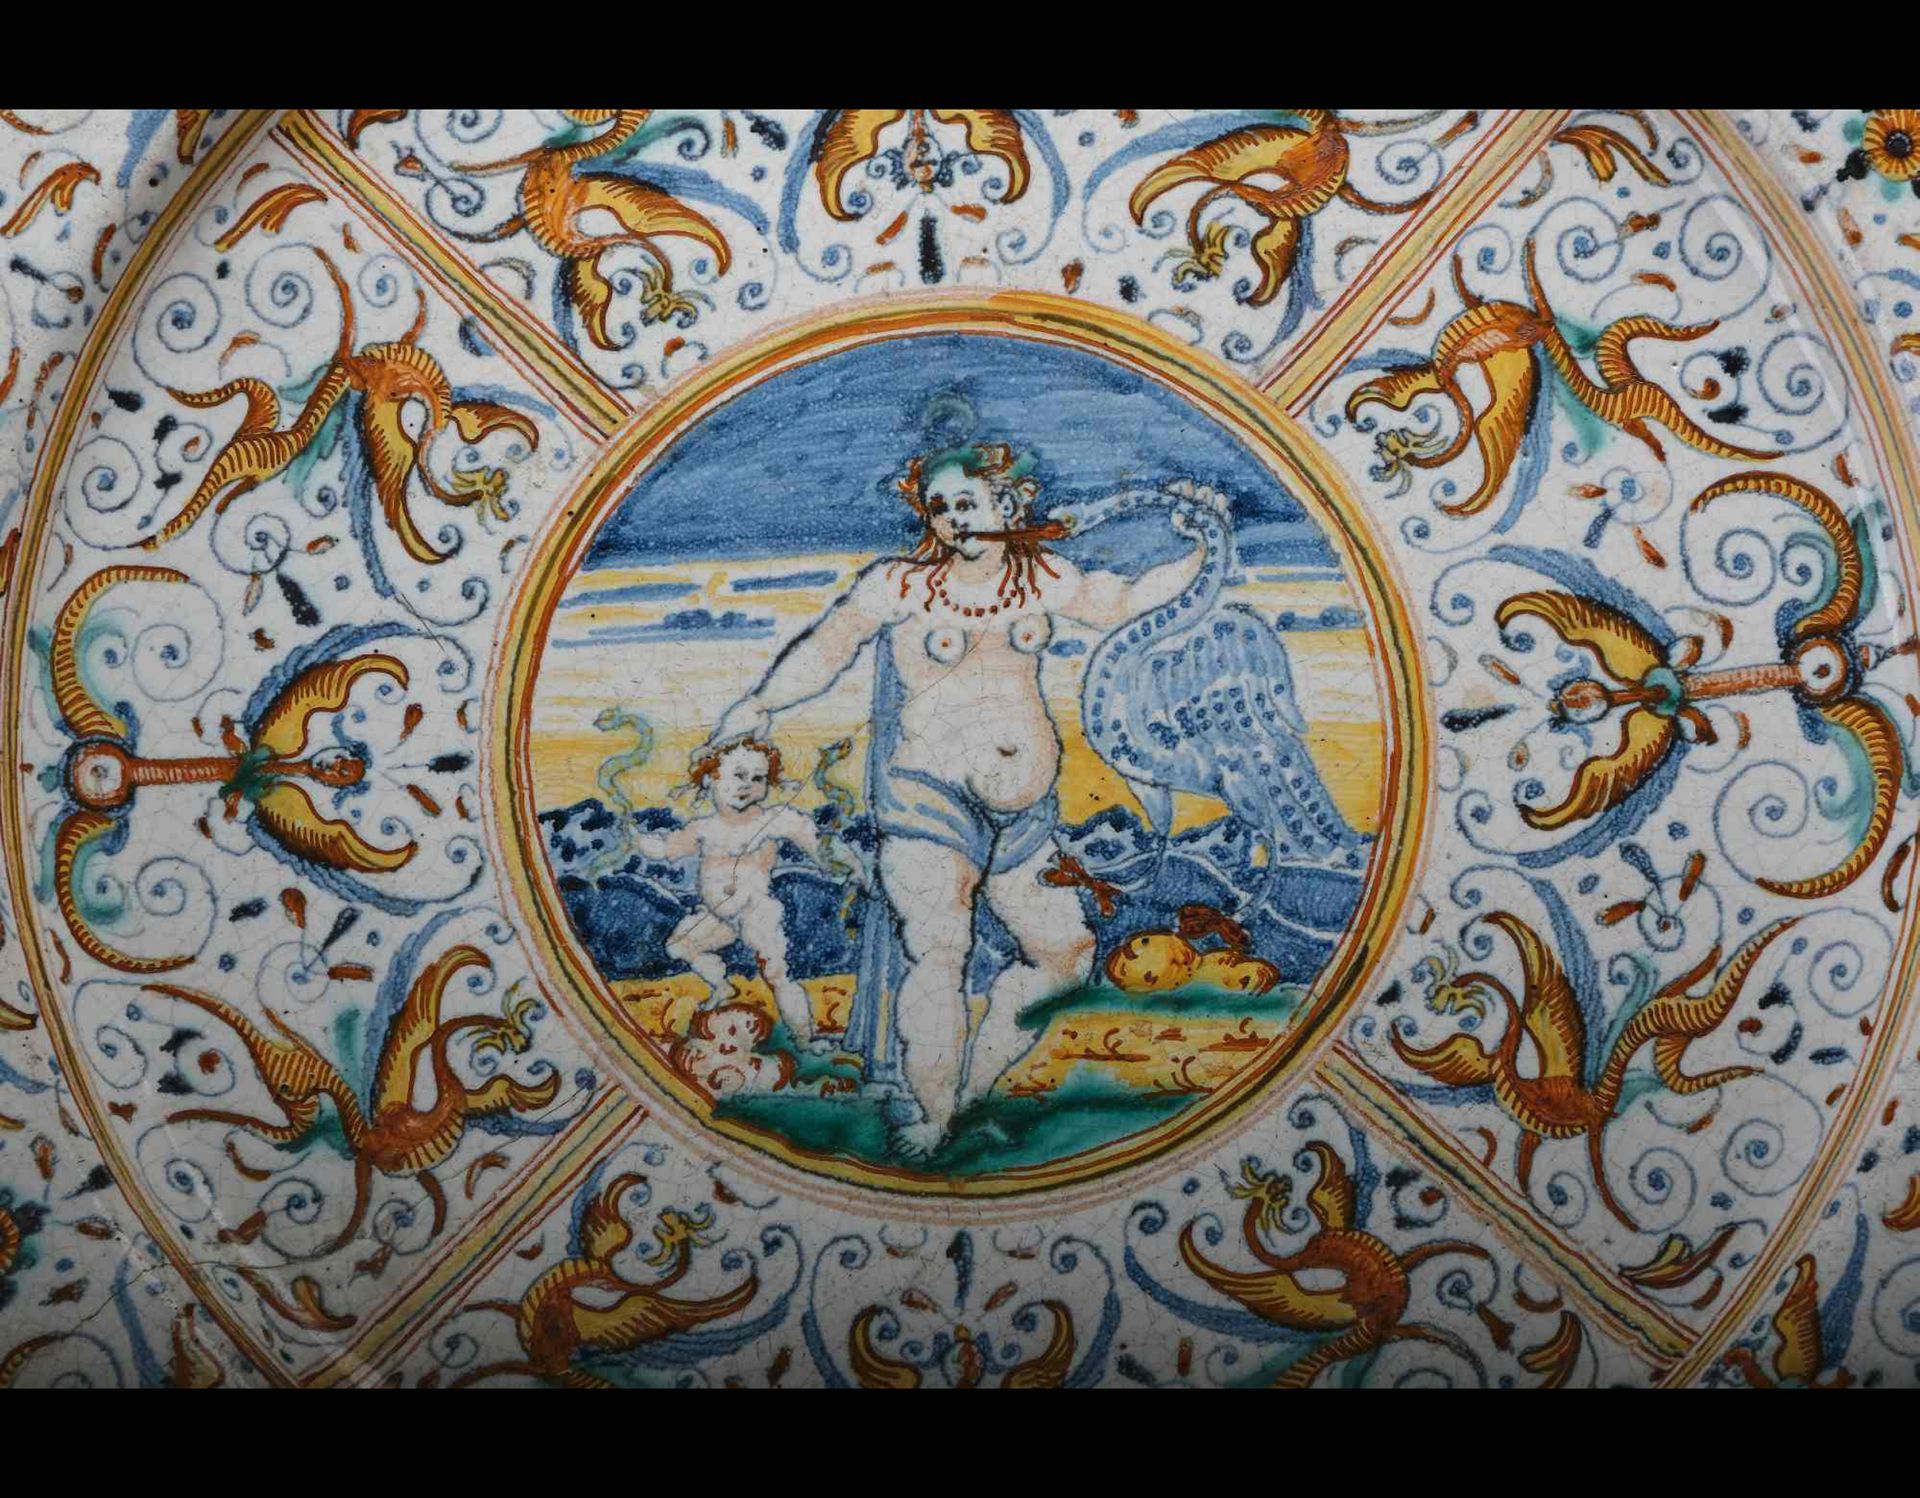 Large Deruta plate, Italy, 17th century - Image 3 of 3